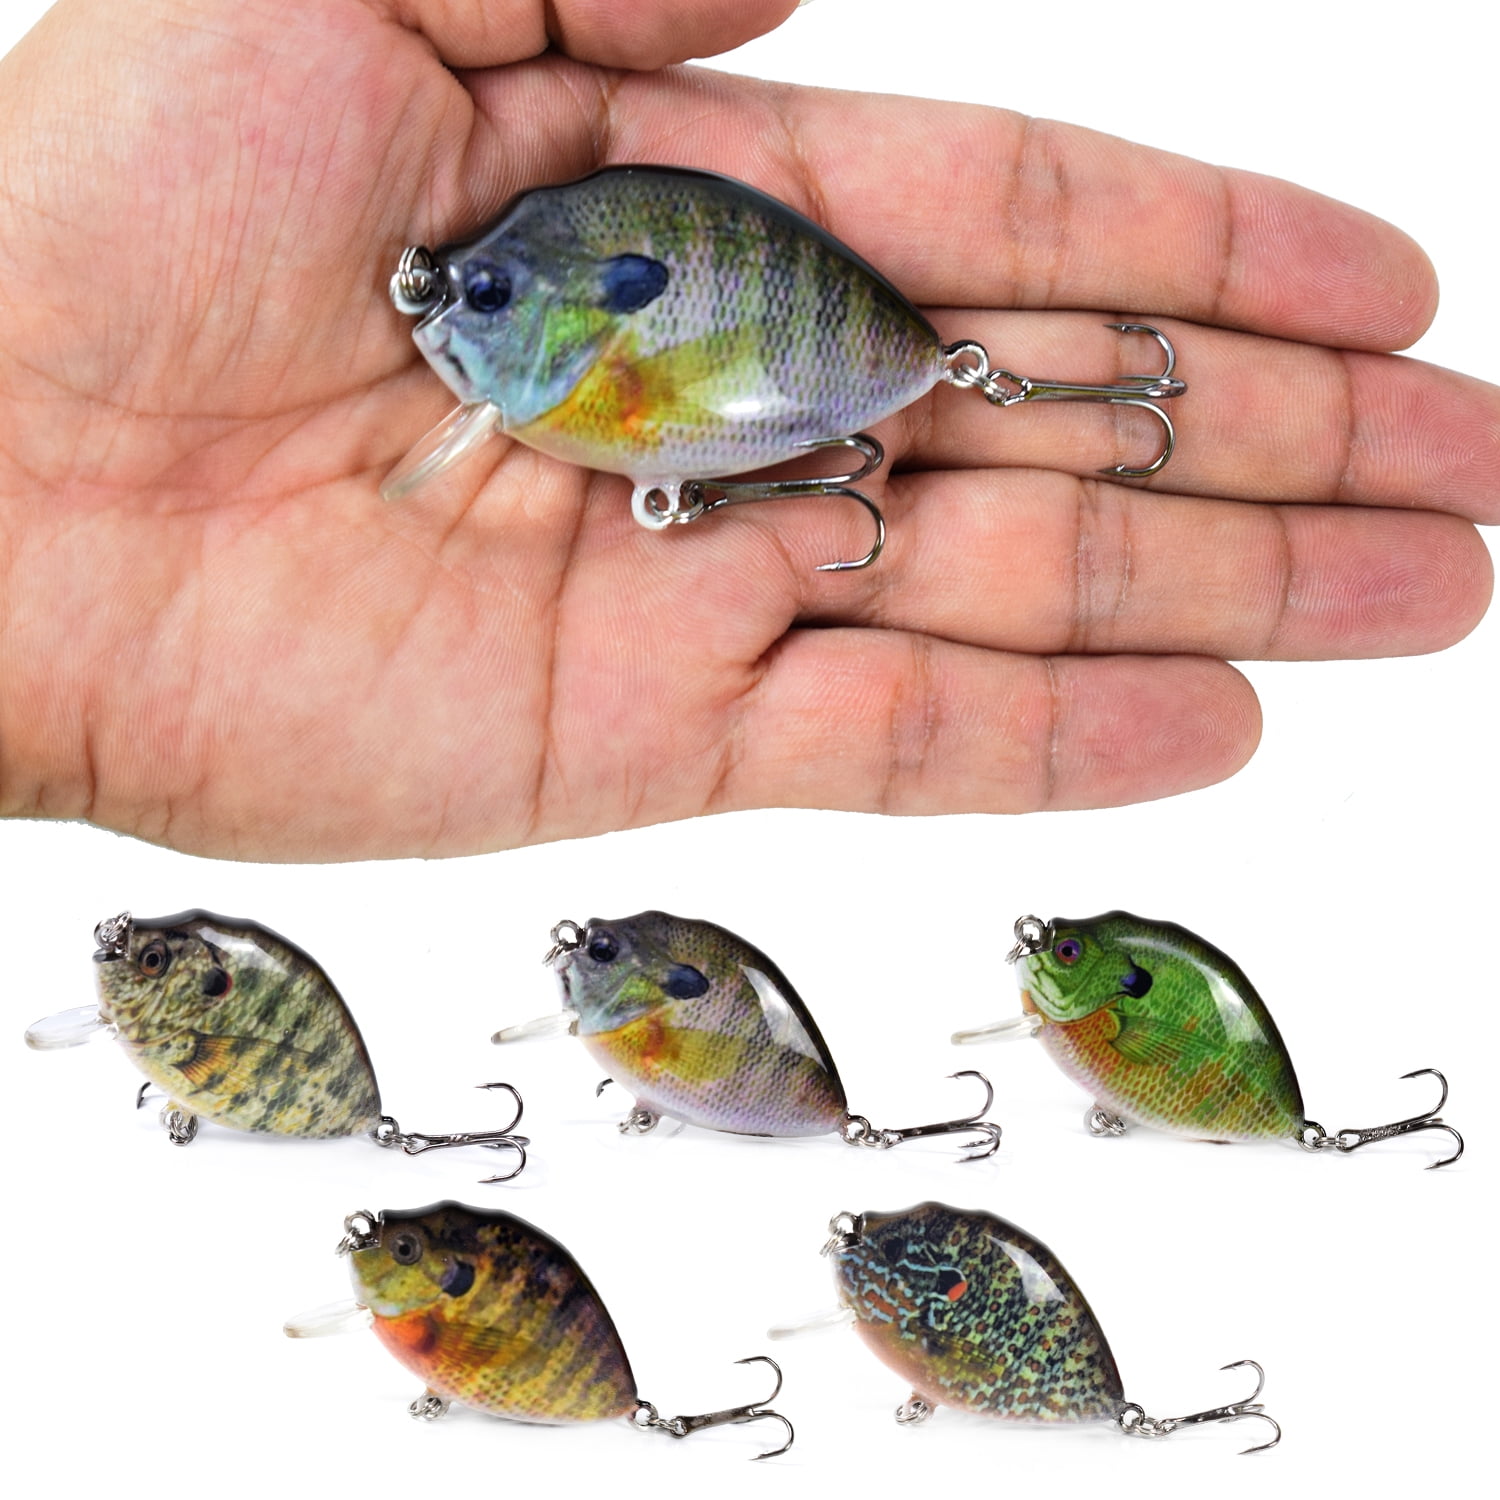 5pcs Cute Frog Topwater Fishing Lure Crankbait Hooks Bass Bait Tackle Useful for sale online 